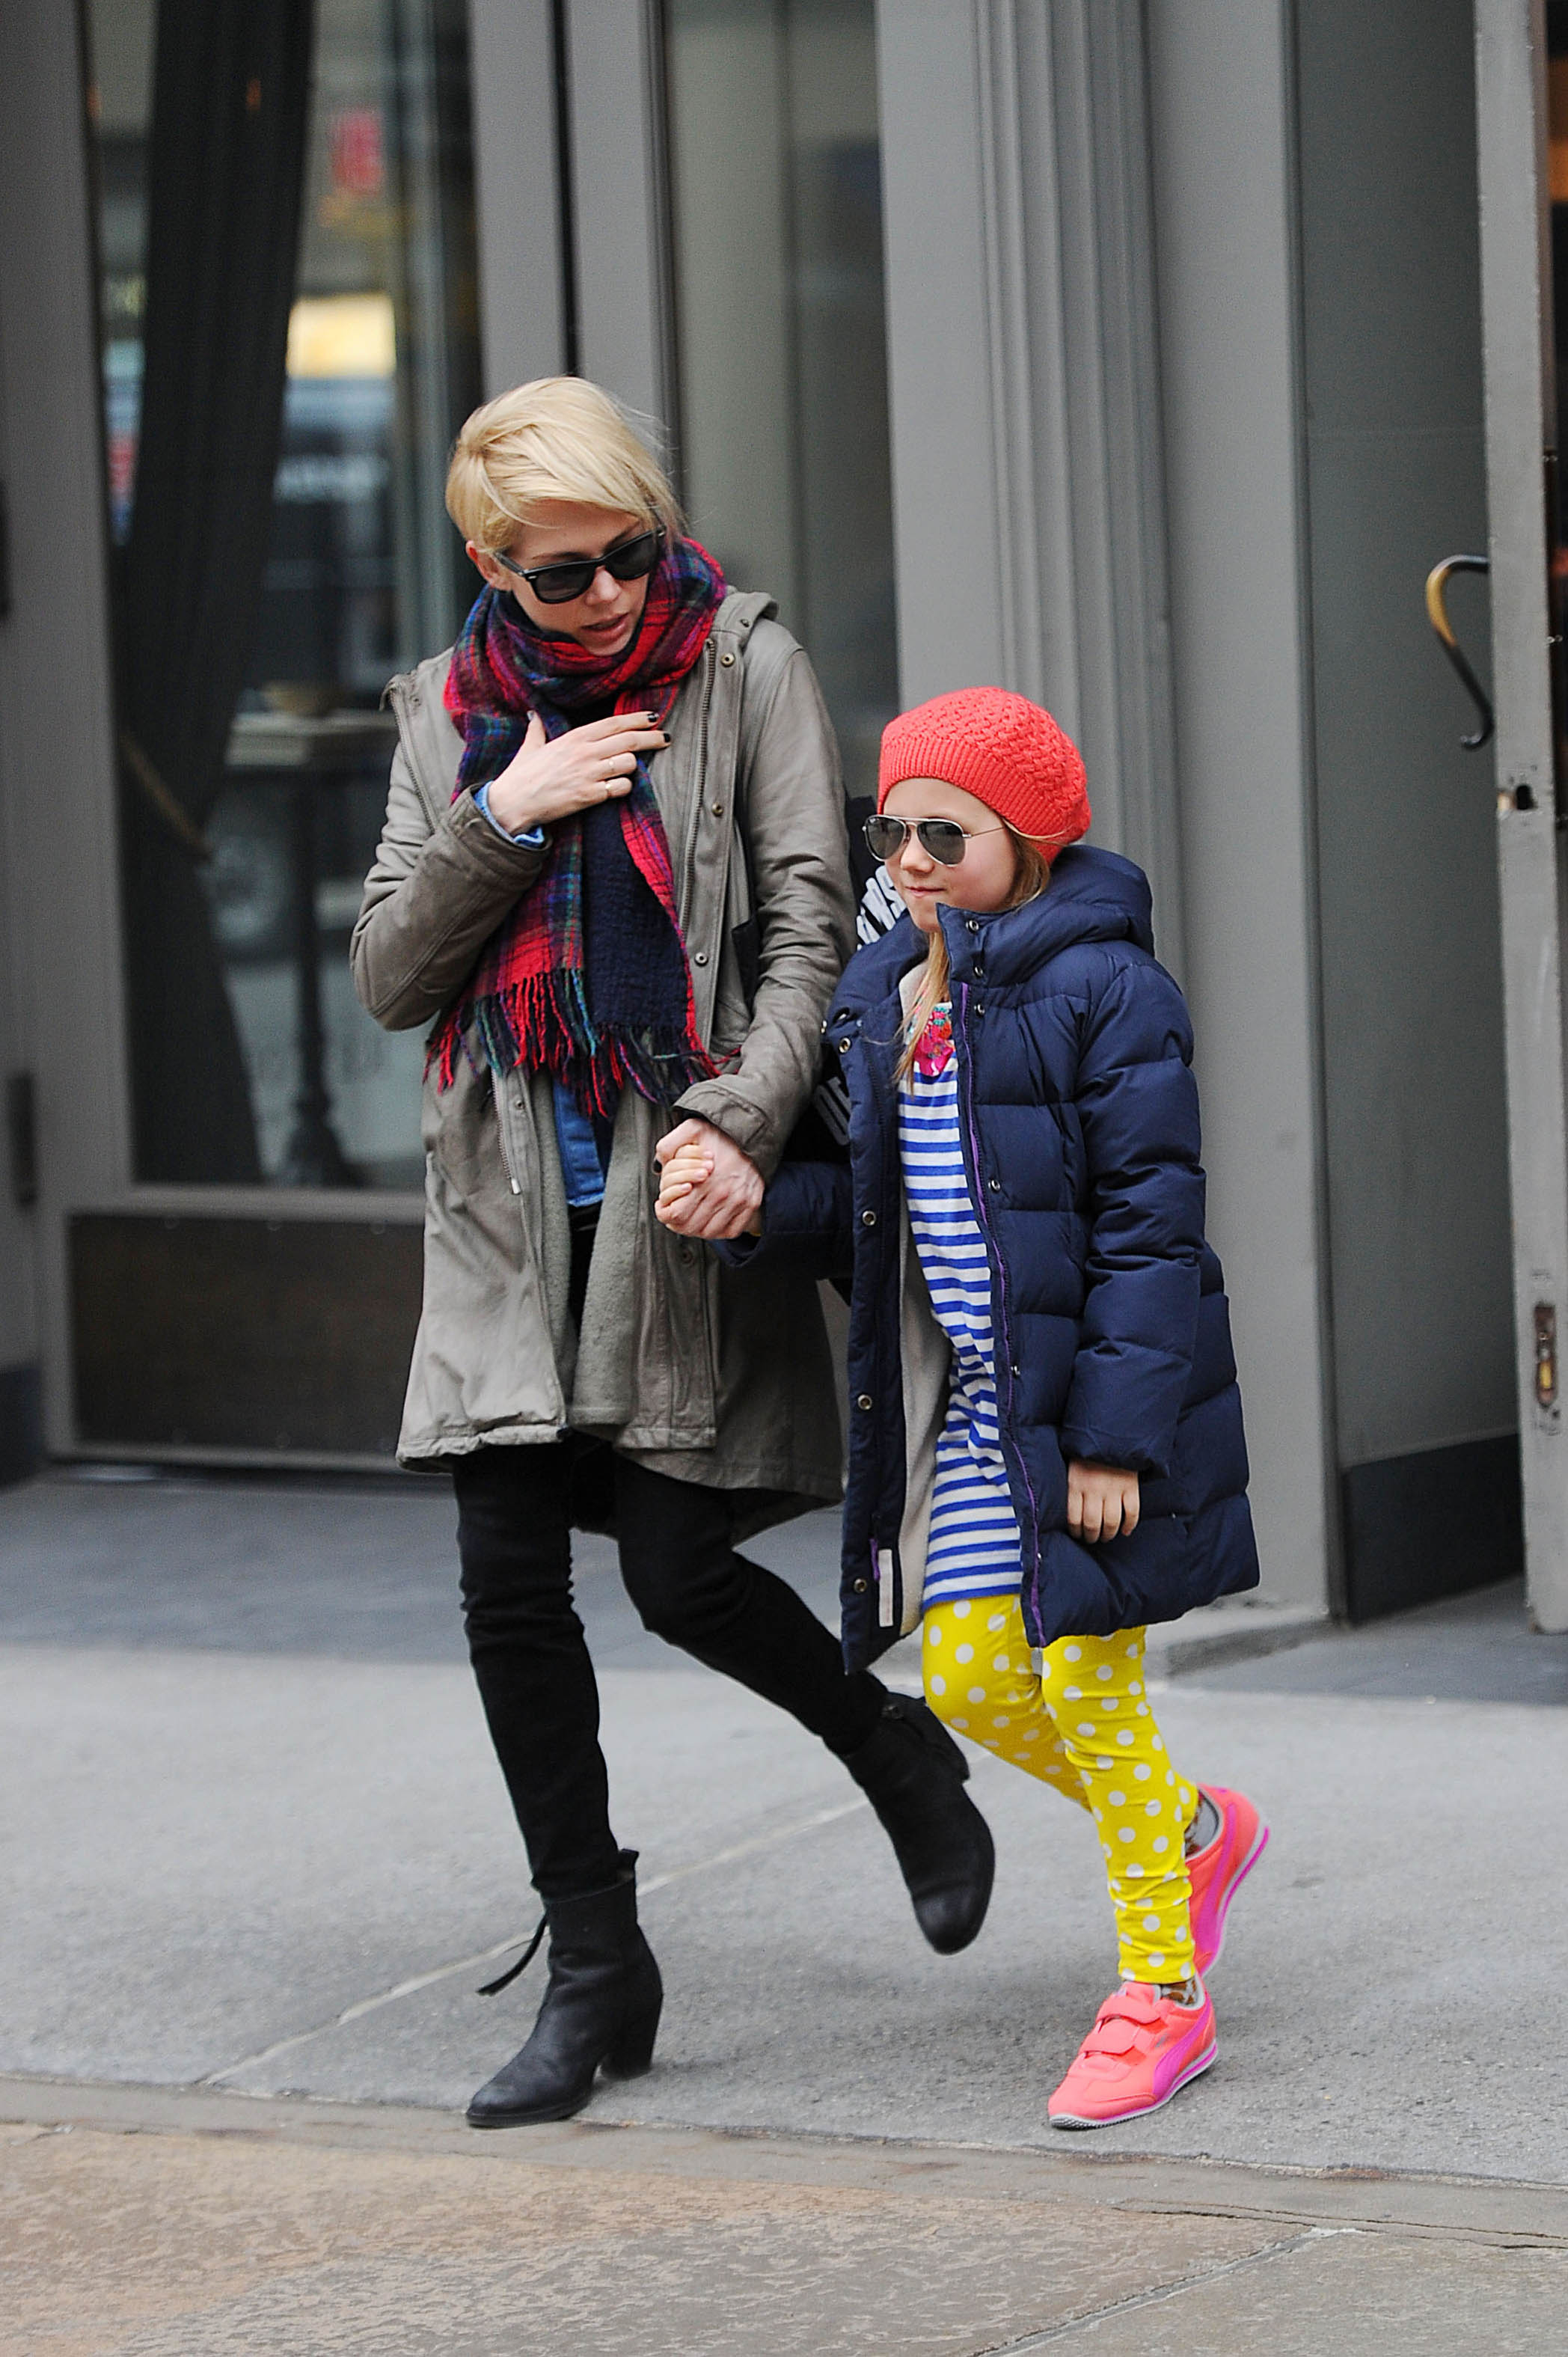 Heath Ledger's daughter Matilda with her mother Michelle Williams in New York City on March 6, 2013 | Source: Getty Images